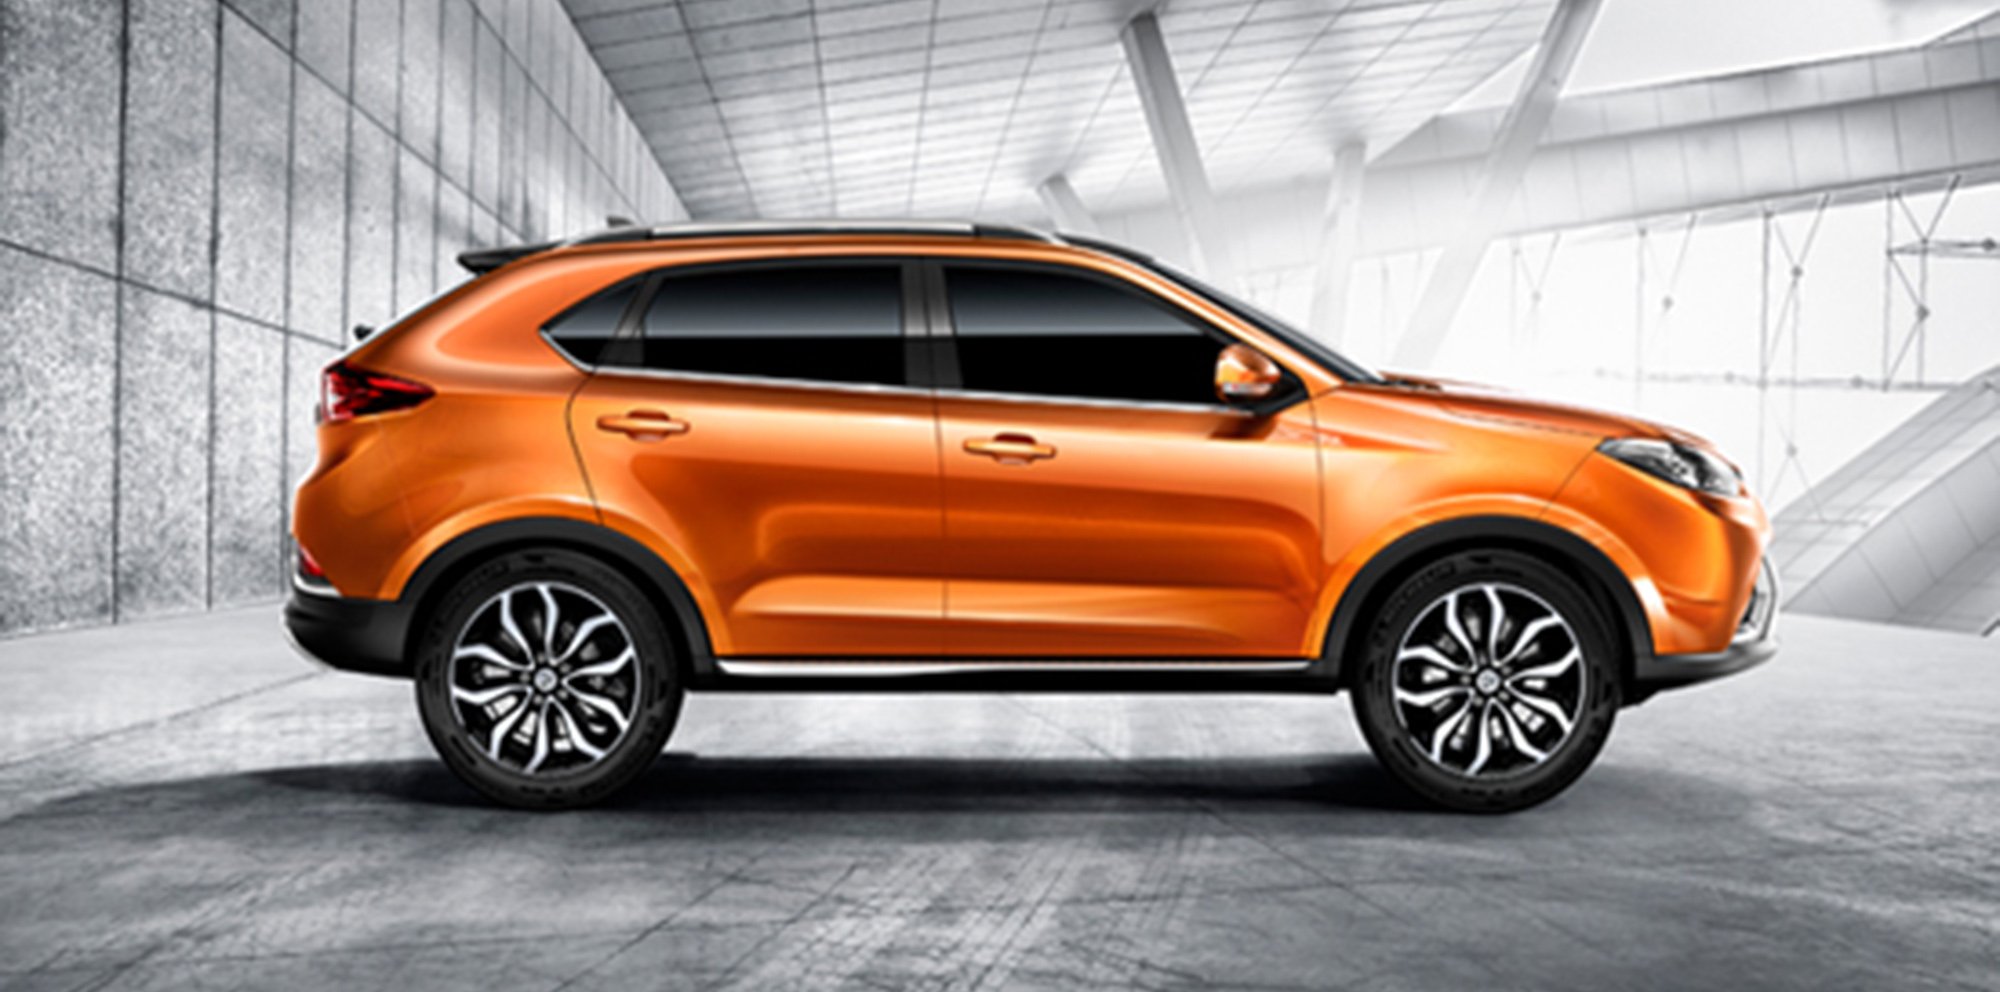 MG GTS SUV unveiled in China - Photos (1 of 4)